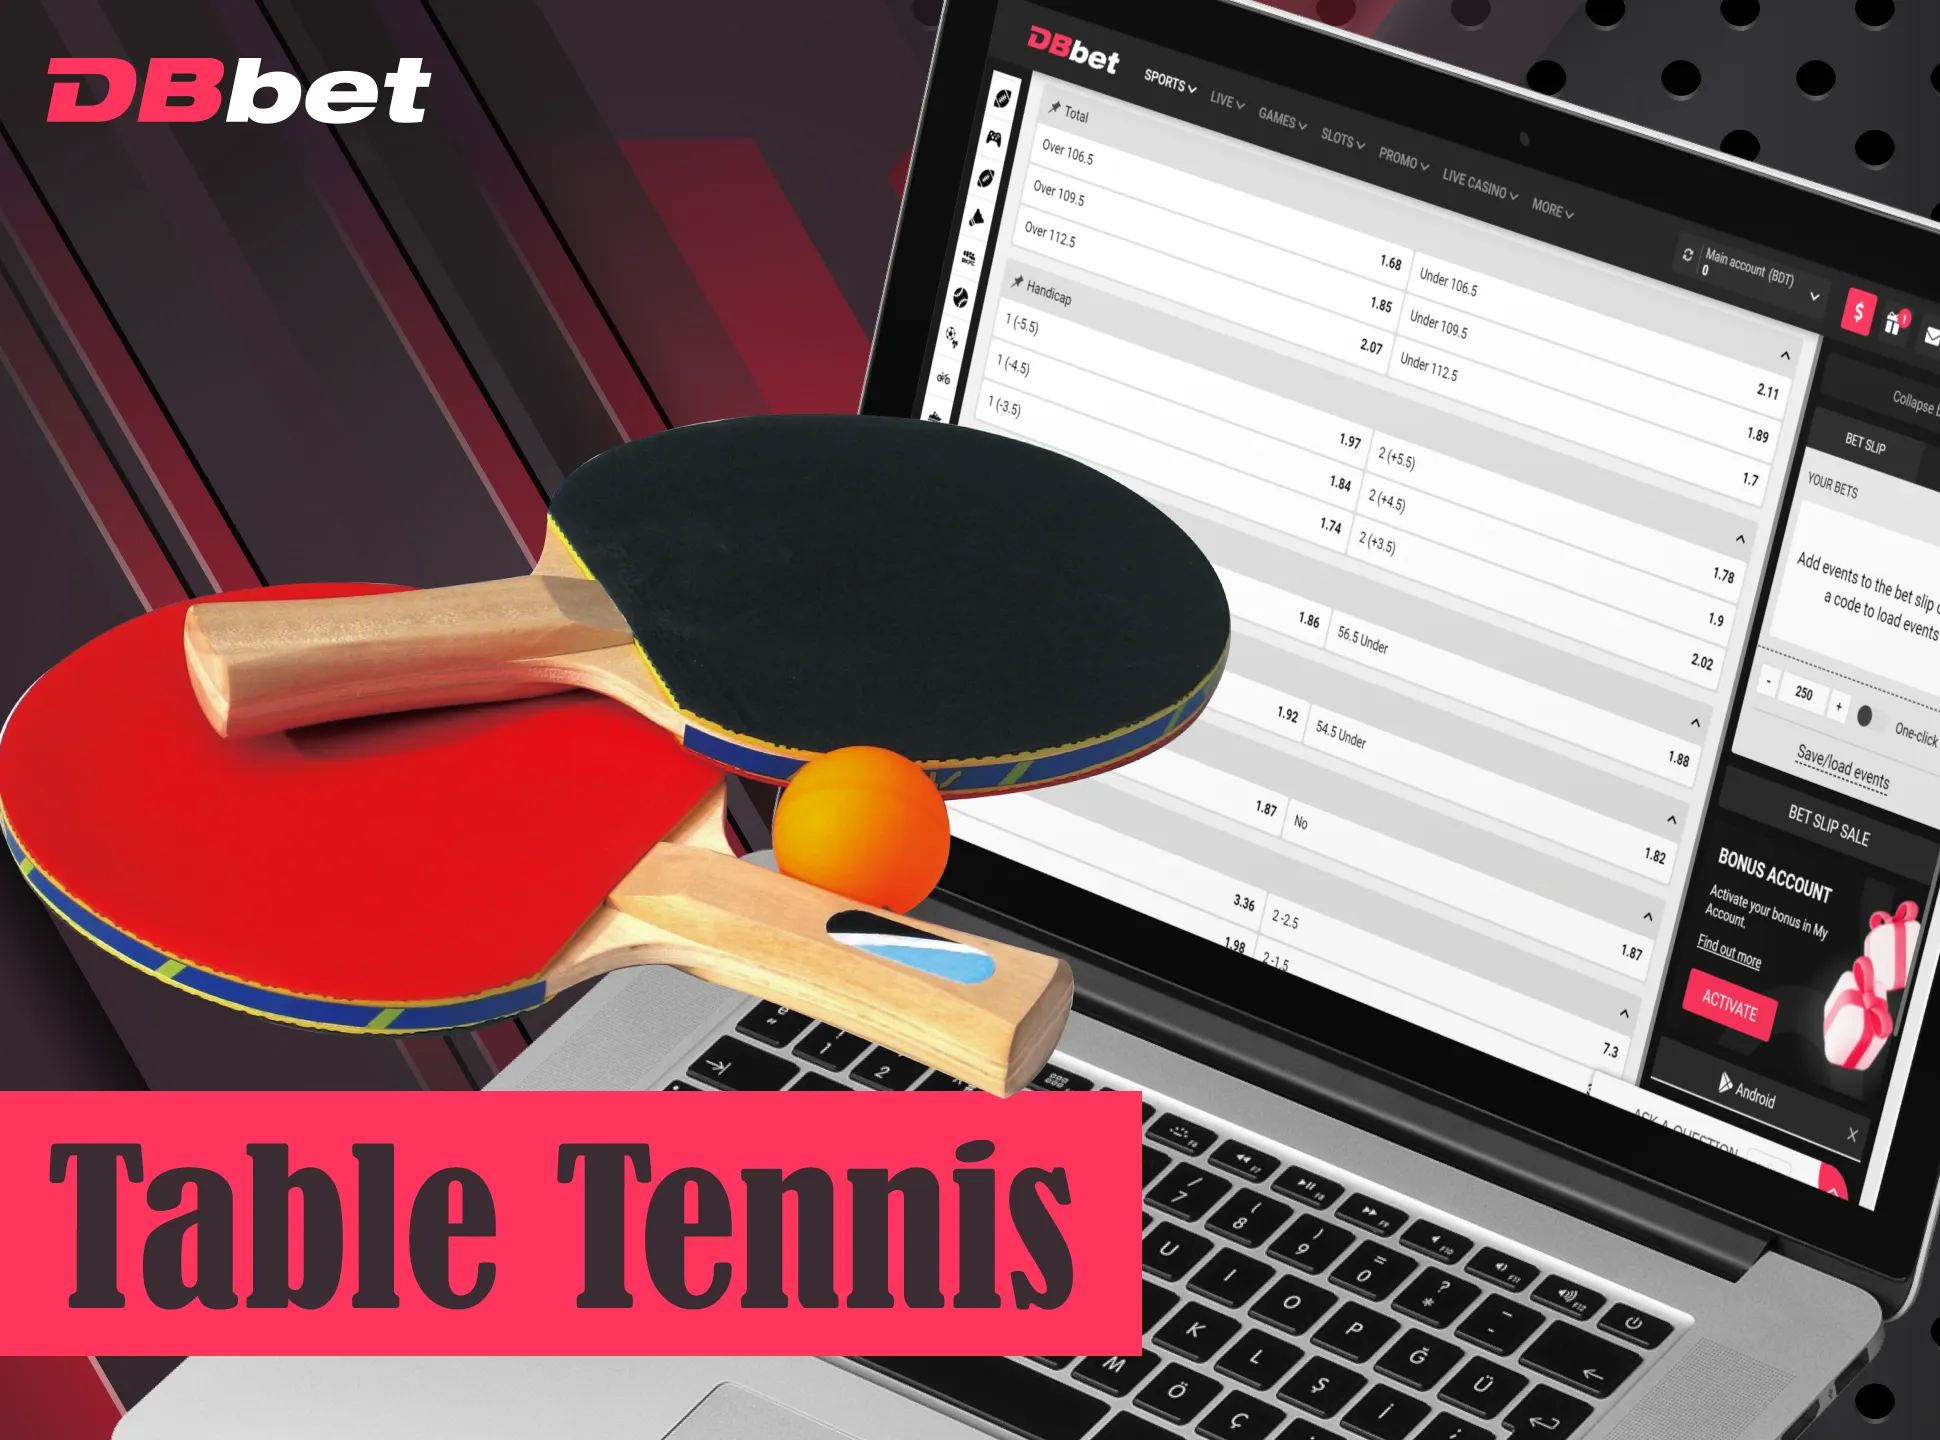 Watch and bet on table tennis at DBbet.